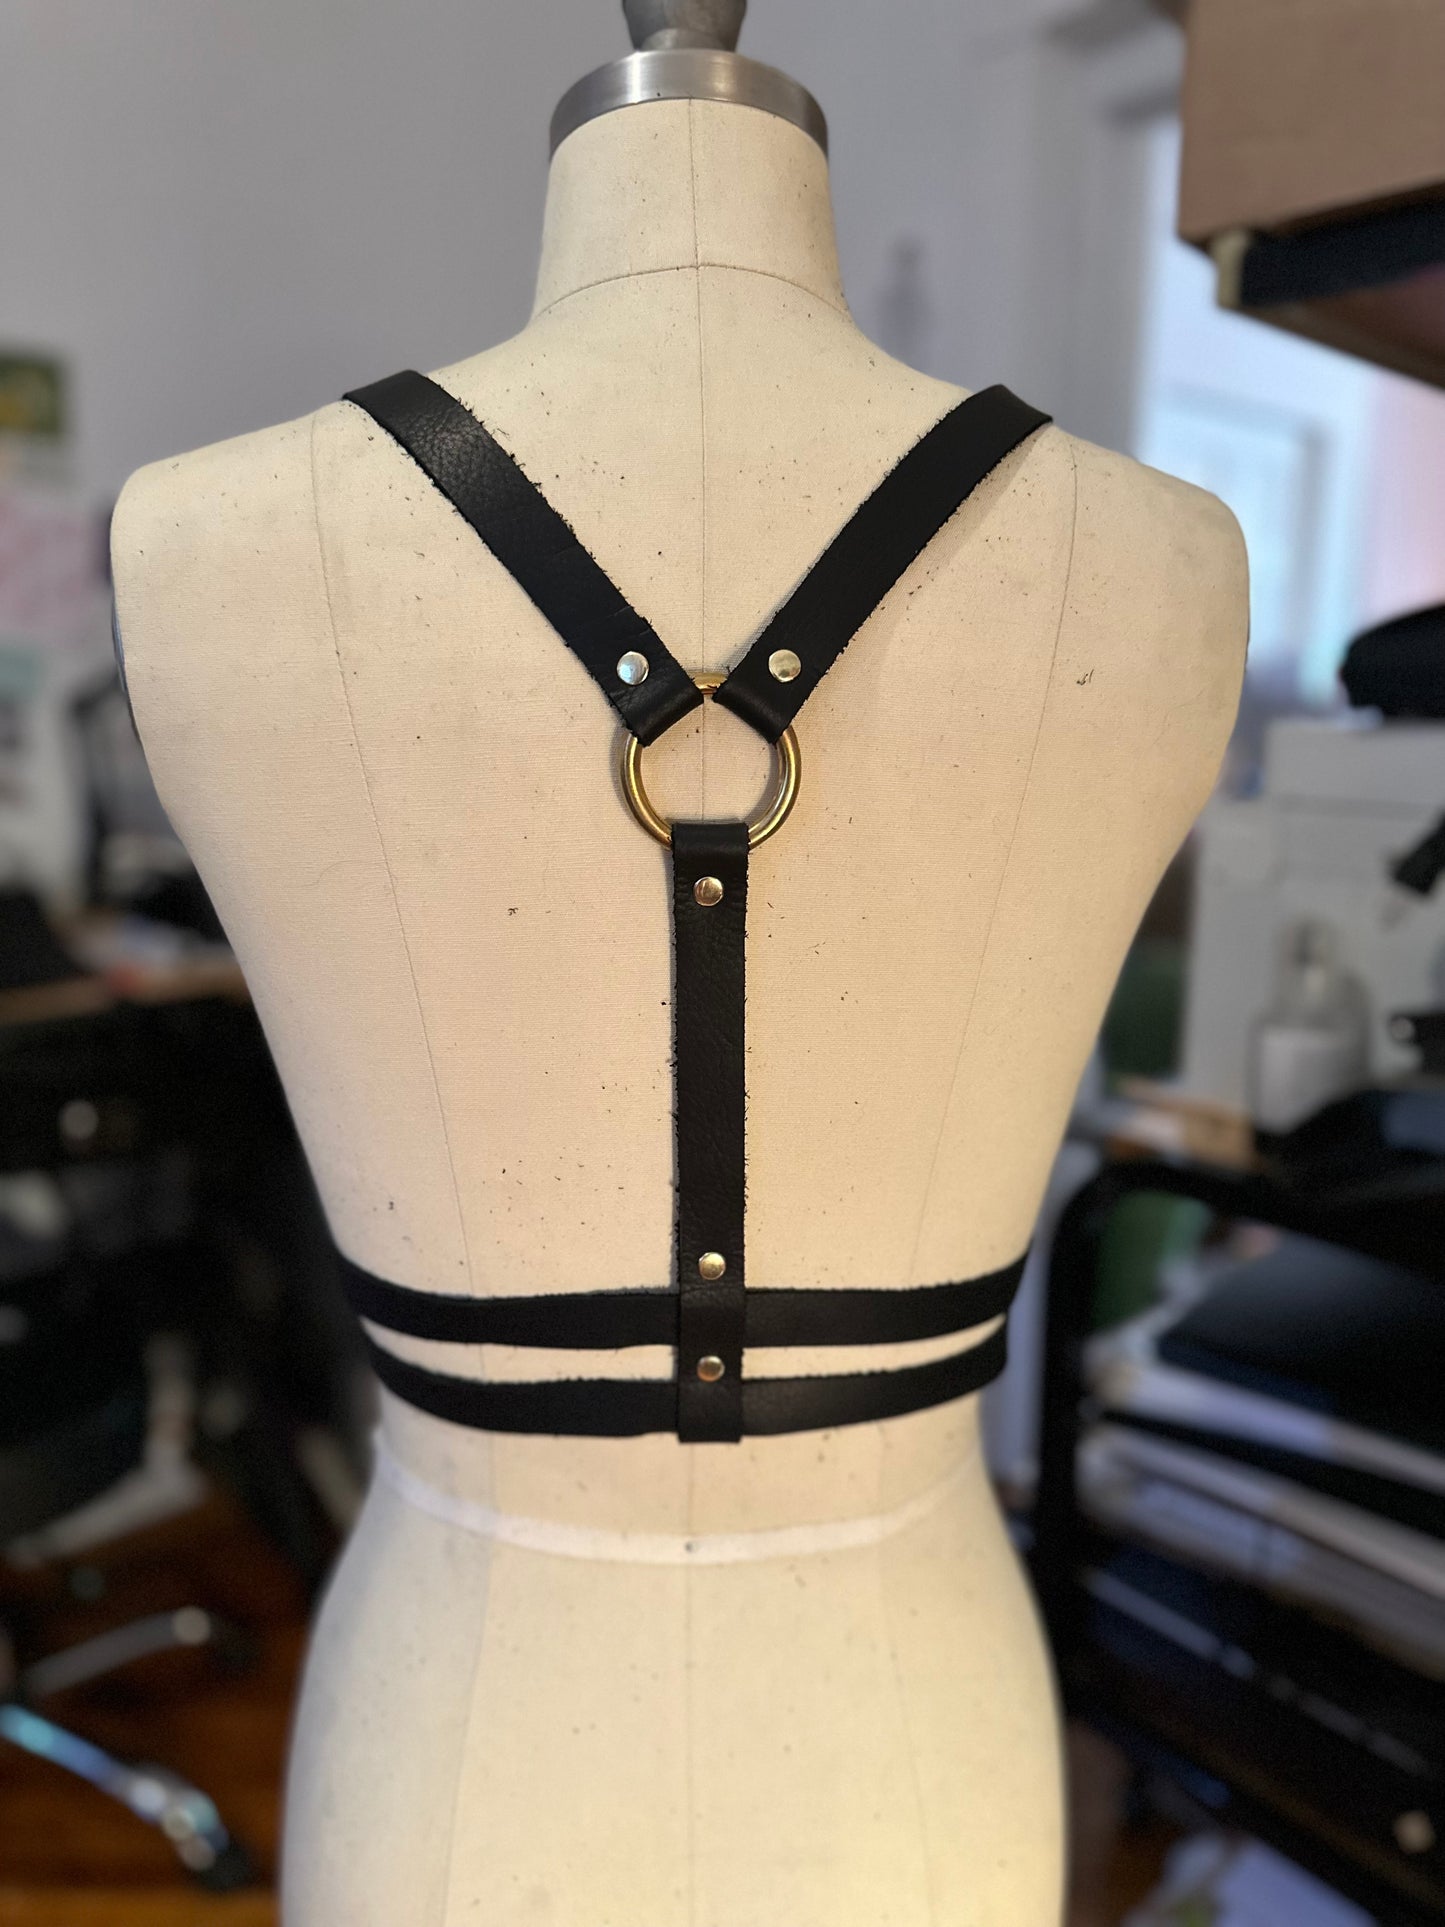 The Magician Harness